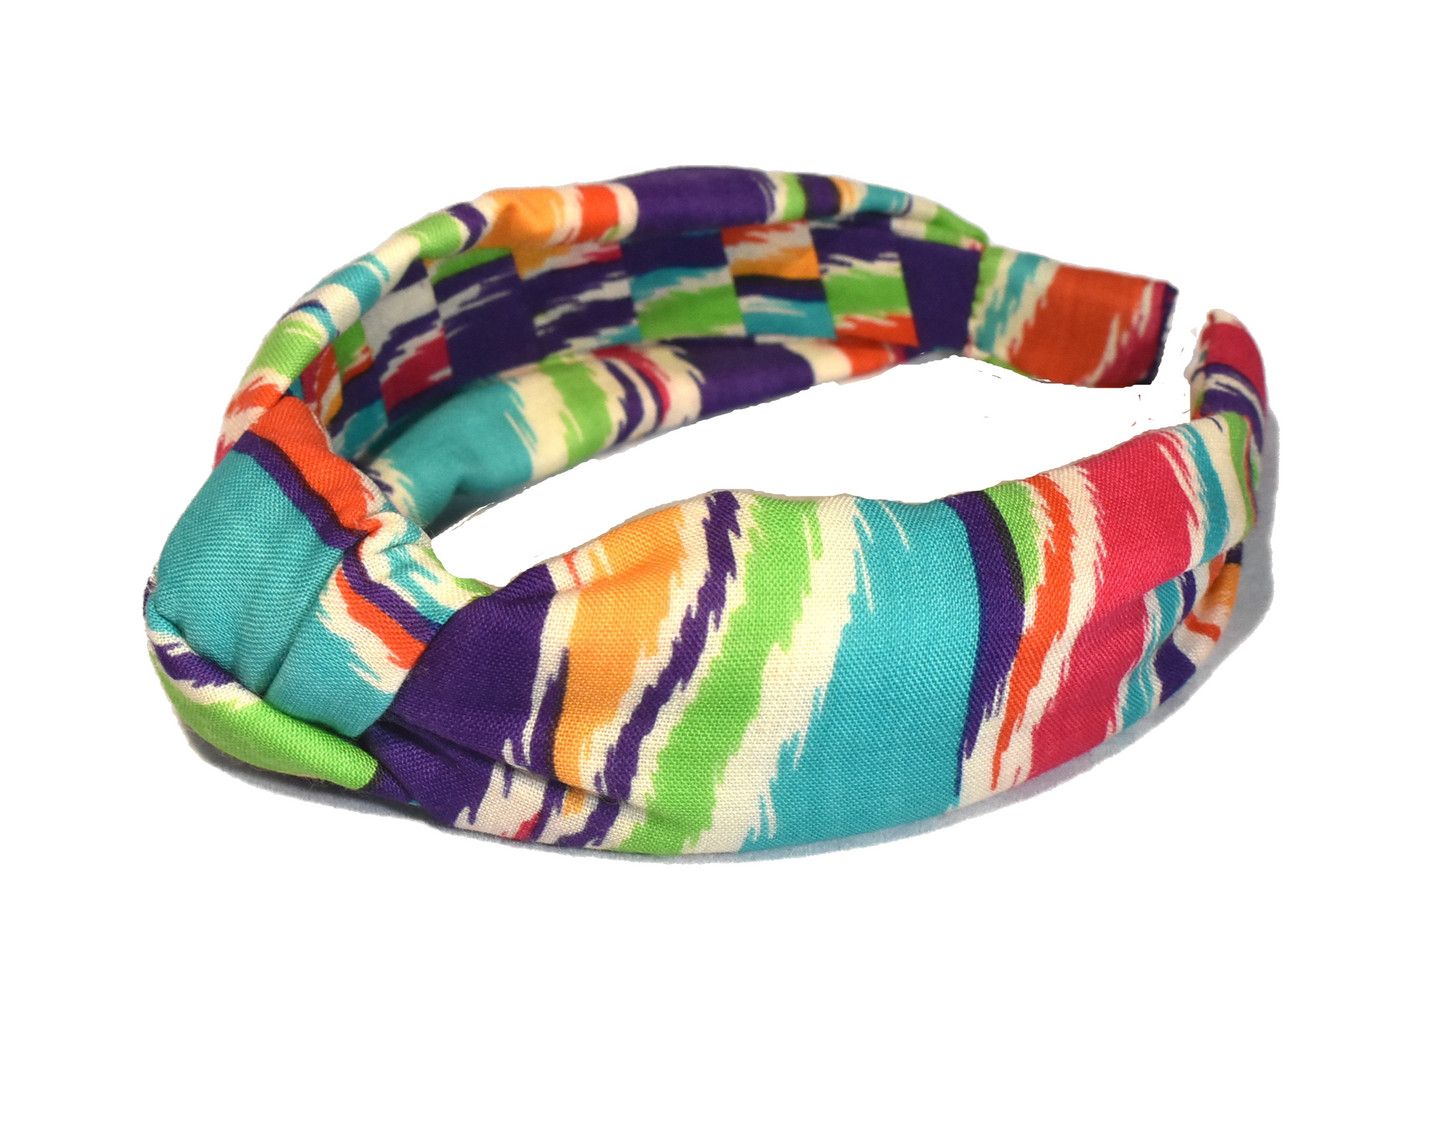 Knot Alice band - Vintage Liberty of London Bright Multicolour Ikat Graphic in Varuna wool